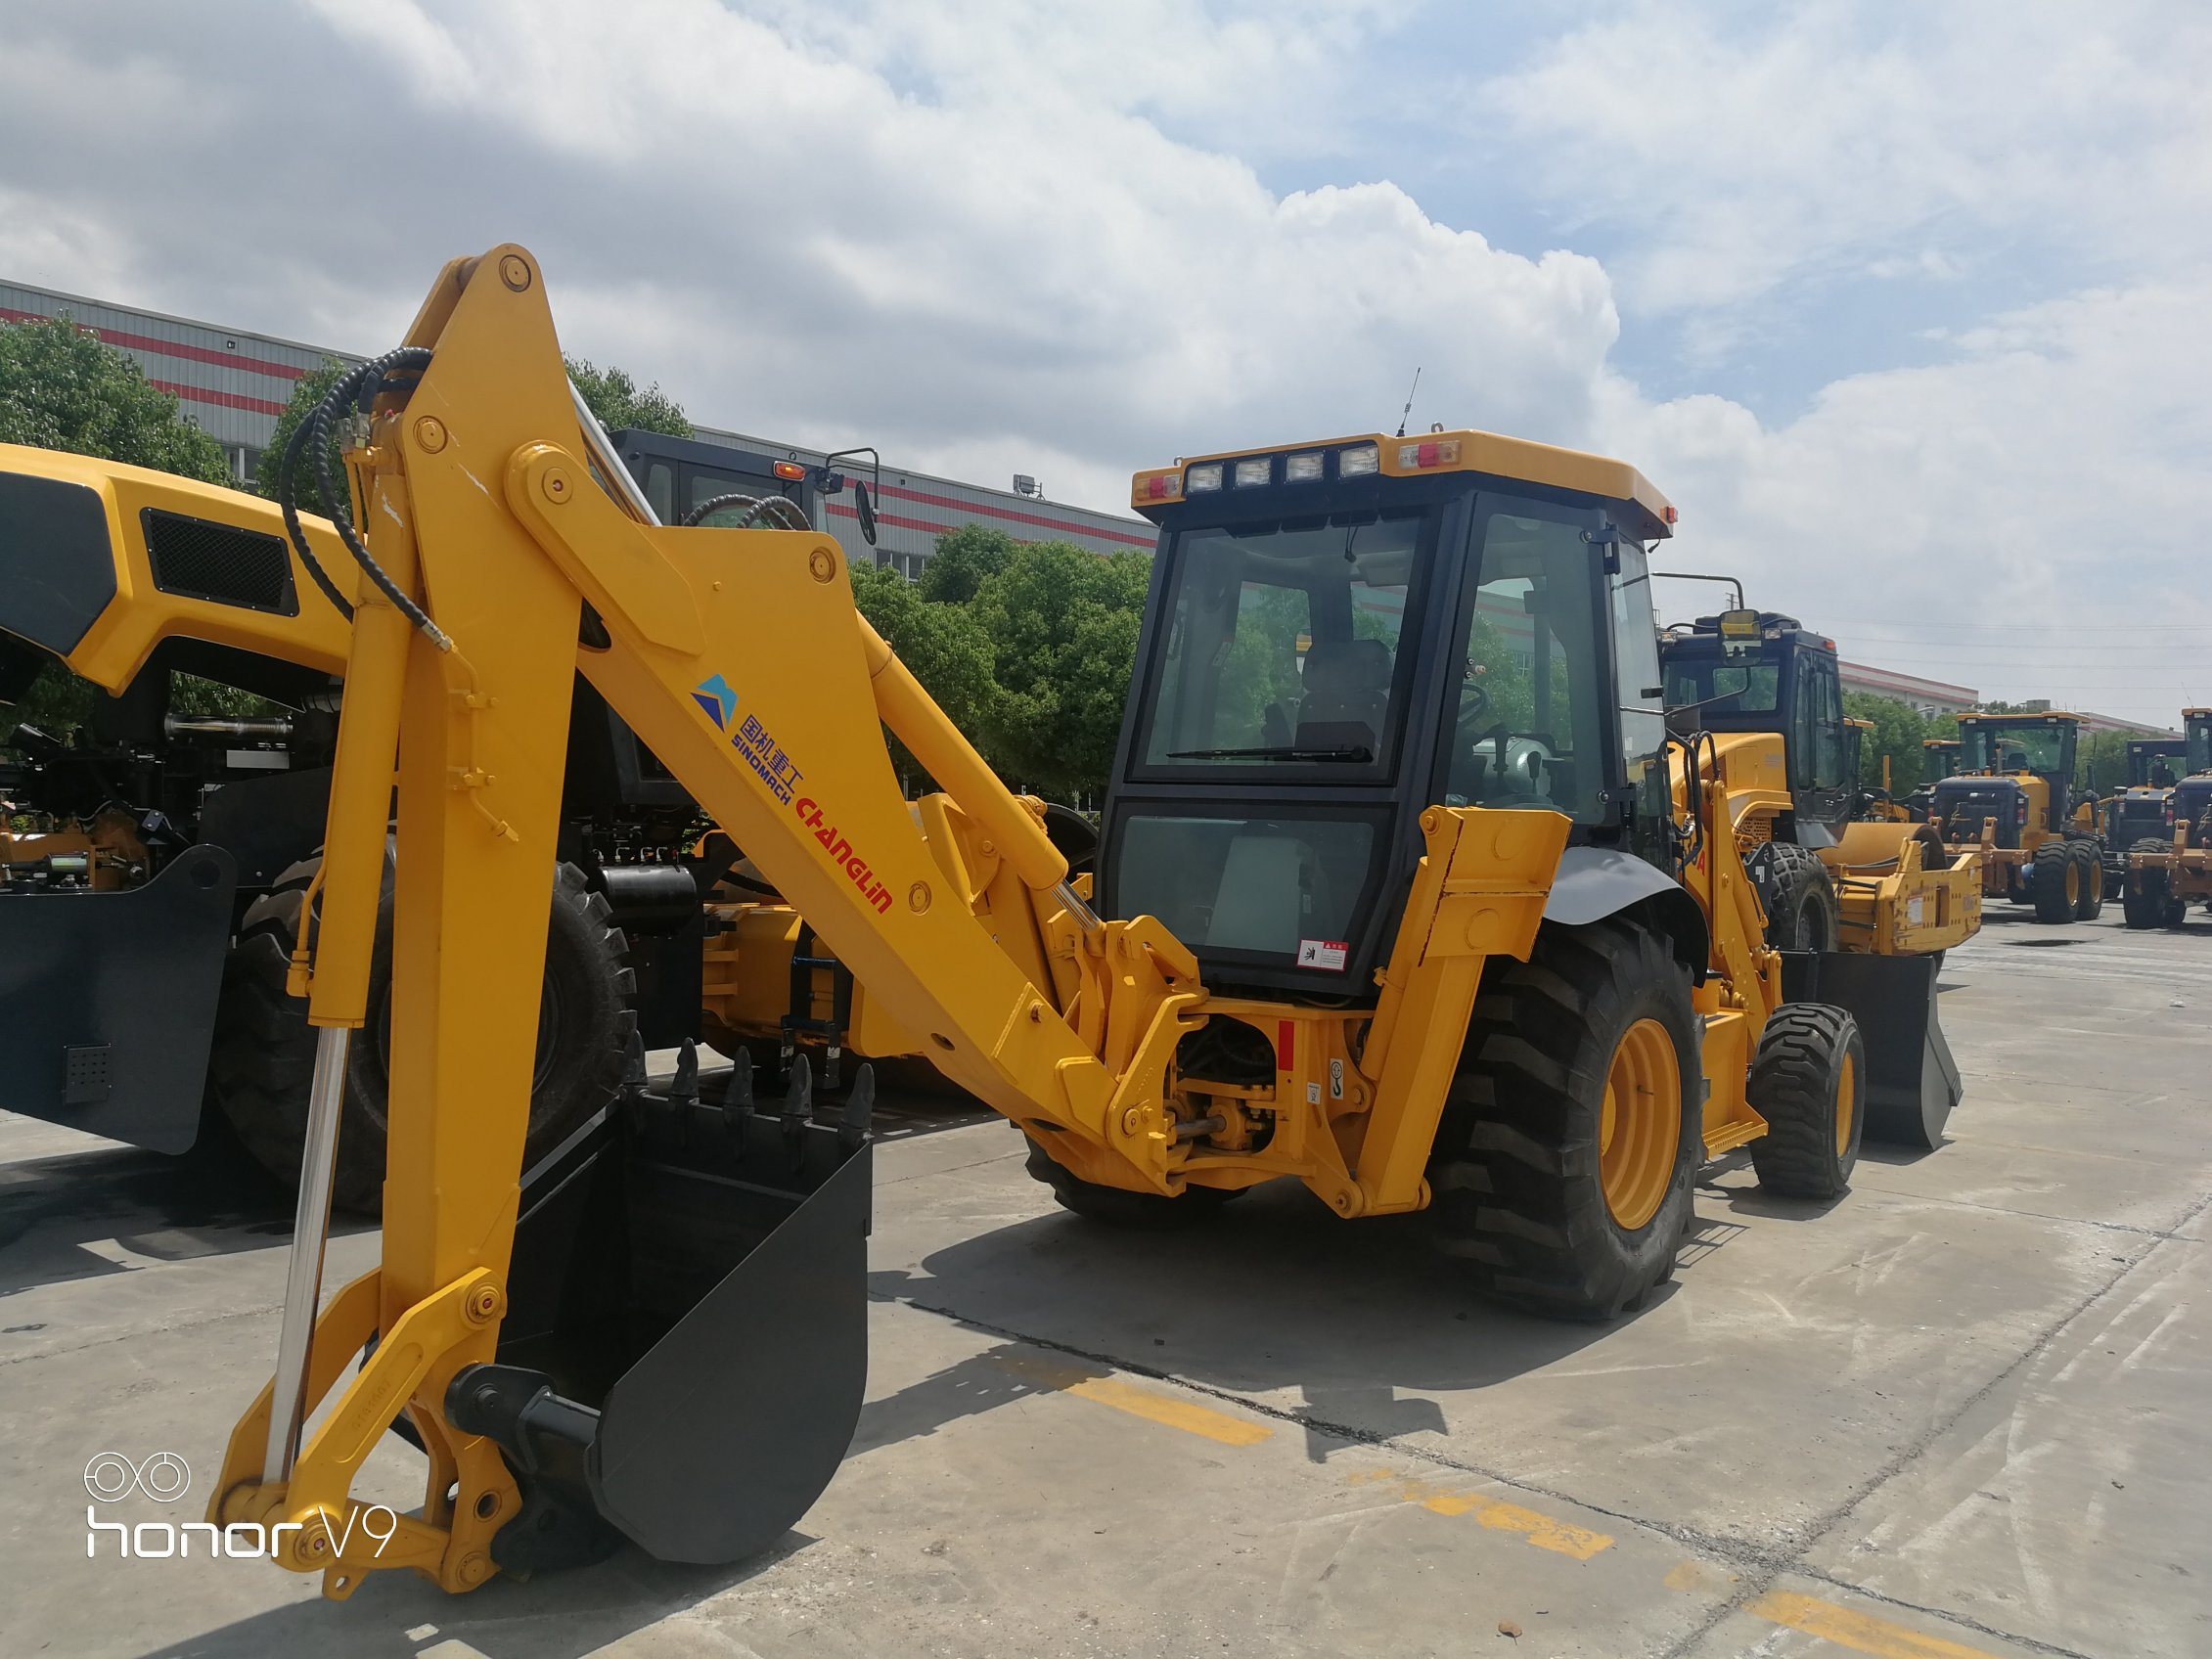 Changlin Excavator Loader Backhoe 1m3 630A Small Garden Tractor with Front-End Loader